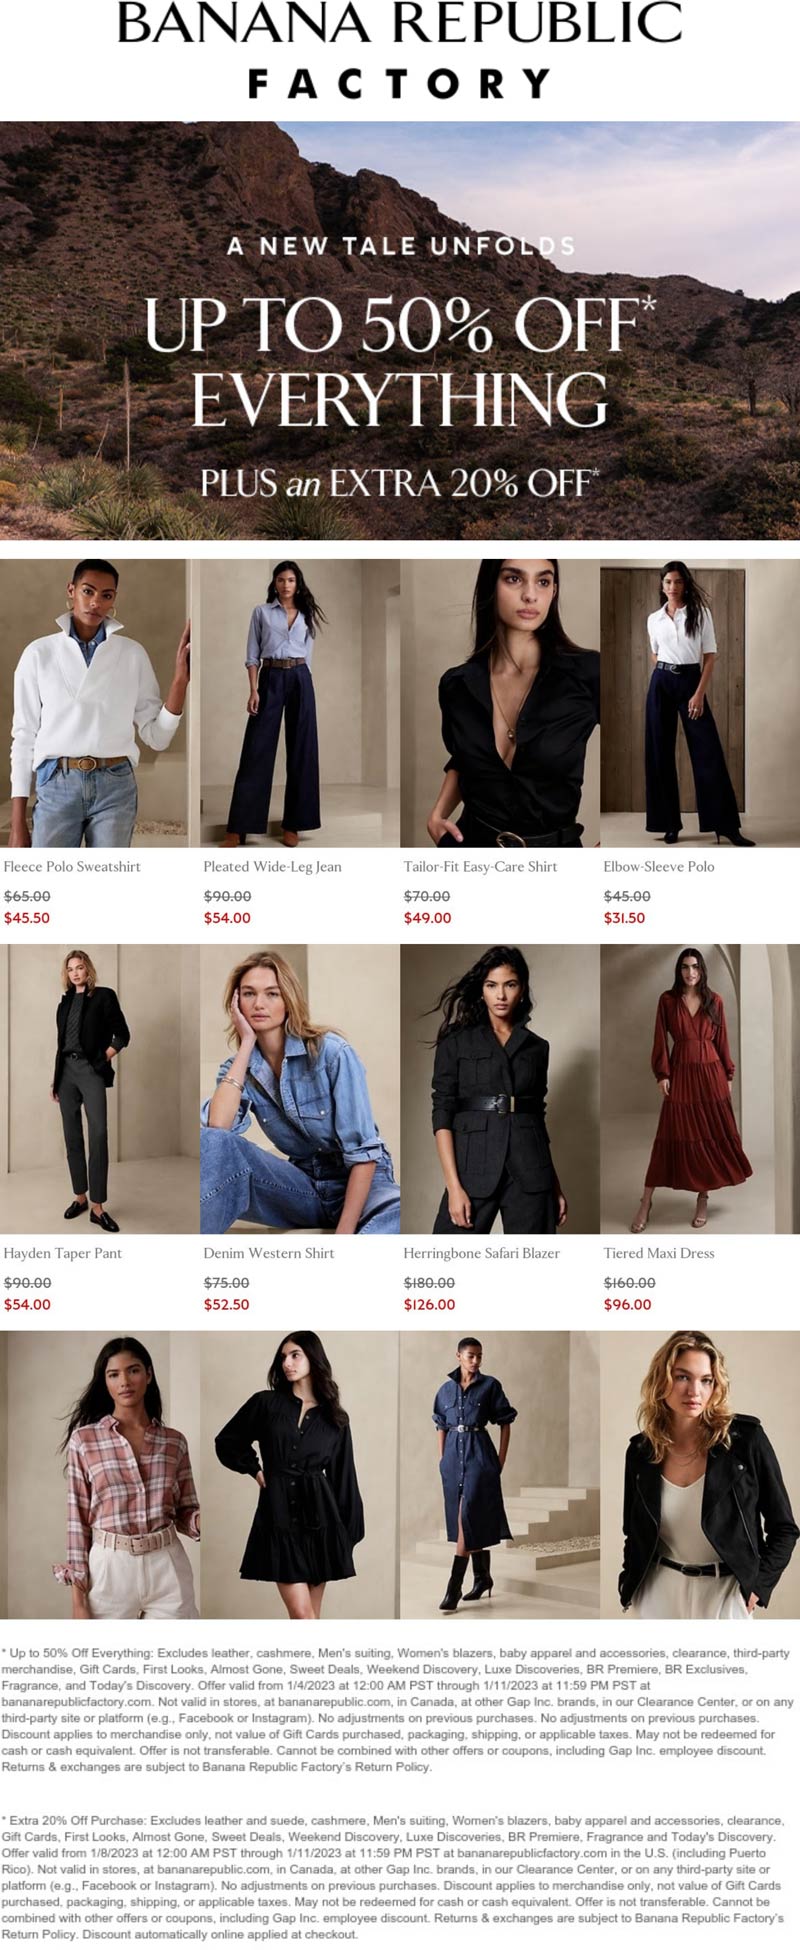 Banana Republic Factory coupons & promo code for [February 2023]